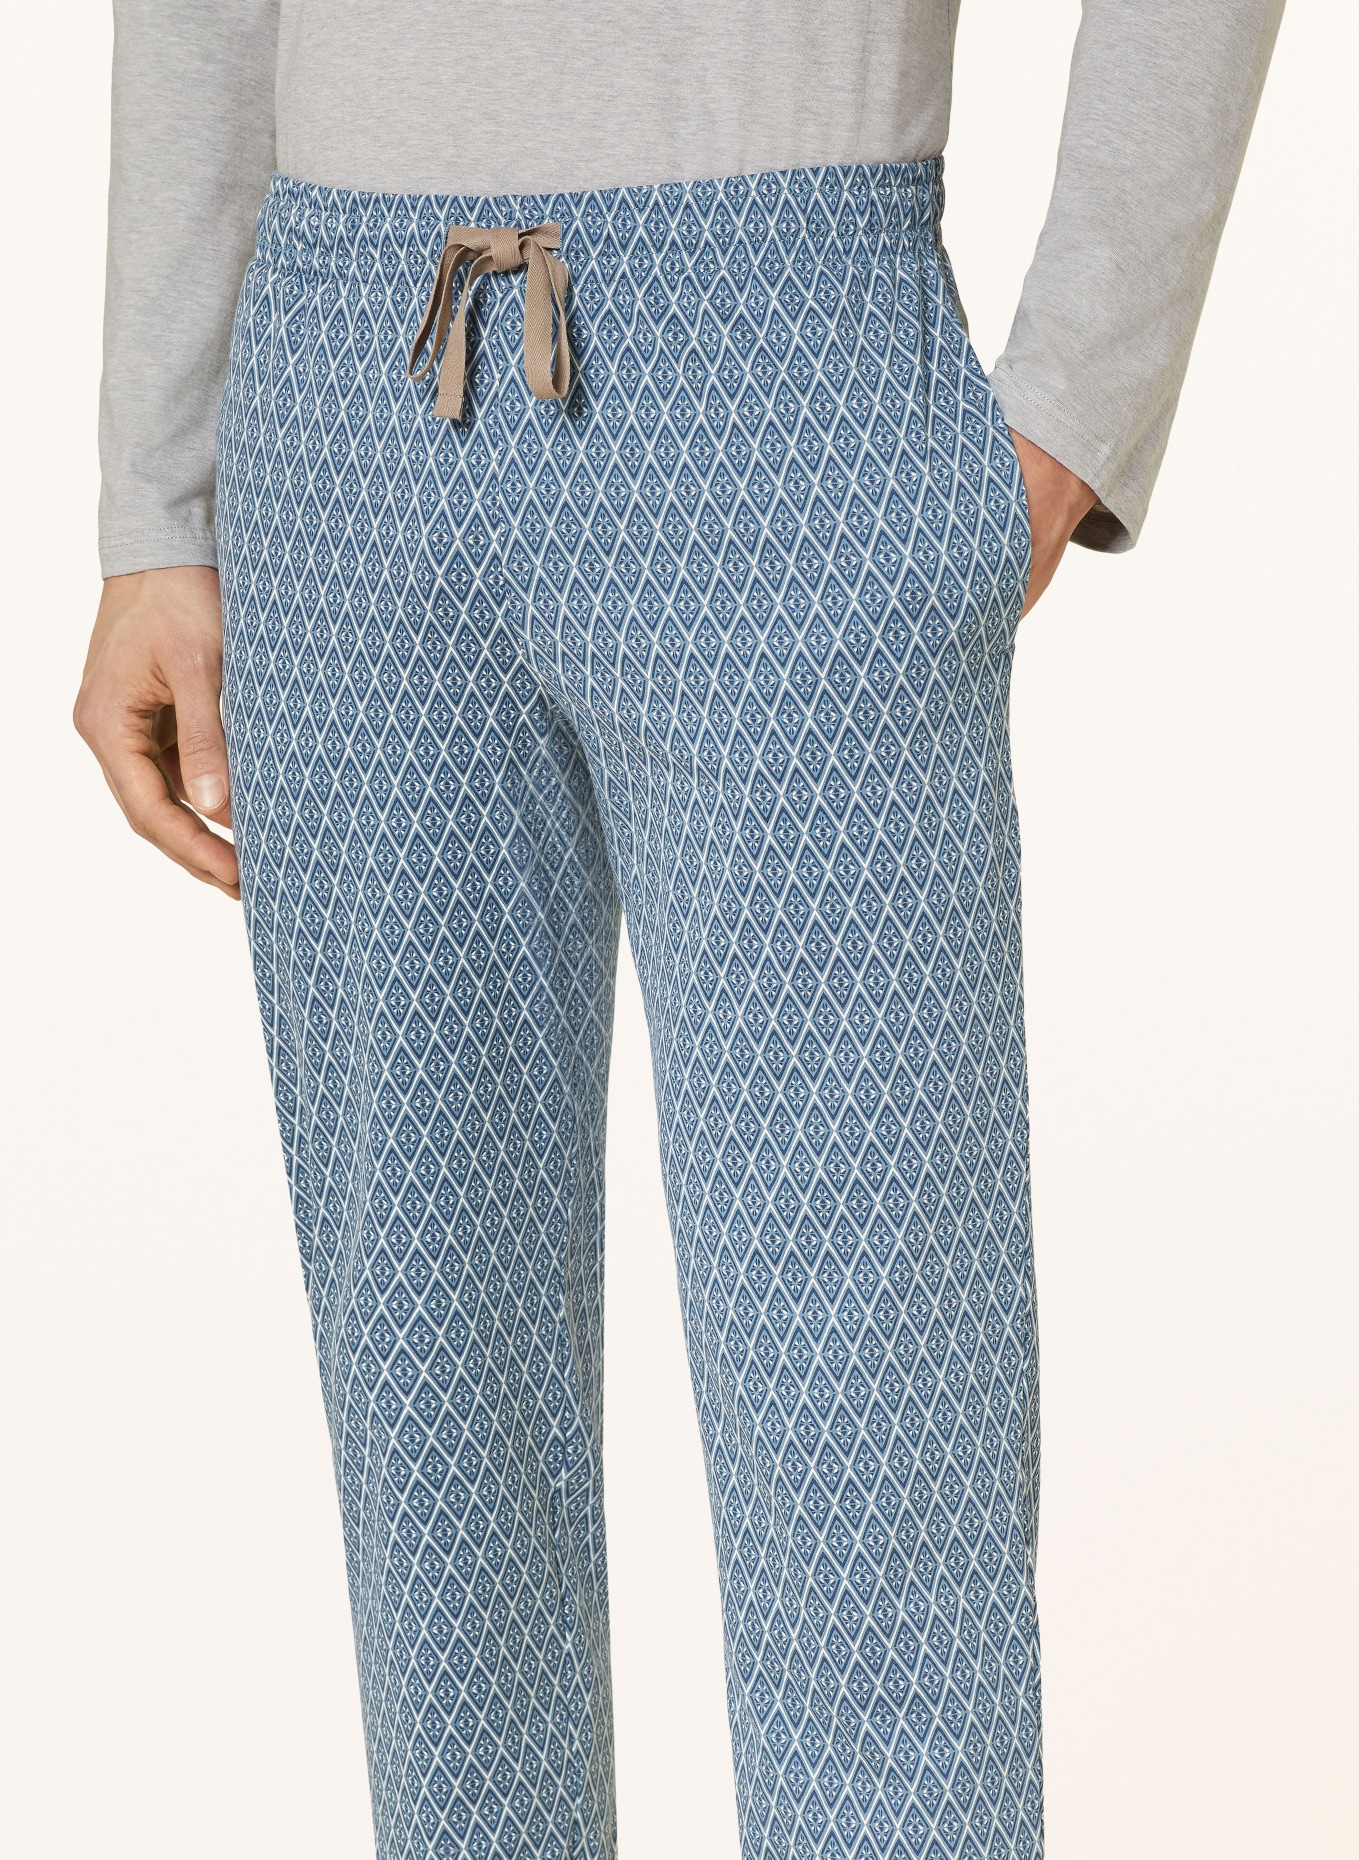 SCHIESSER Pajama pants MIX + RELAX, Color: BLUE GRAY/ BLUE/ WHITE (Image 5)